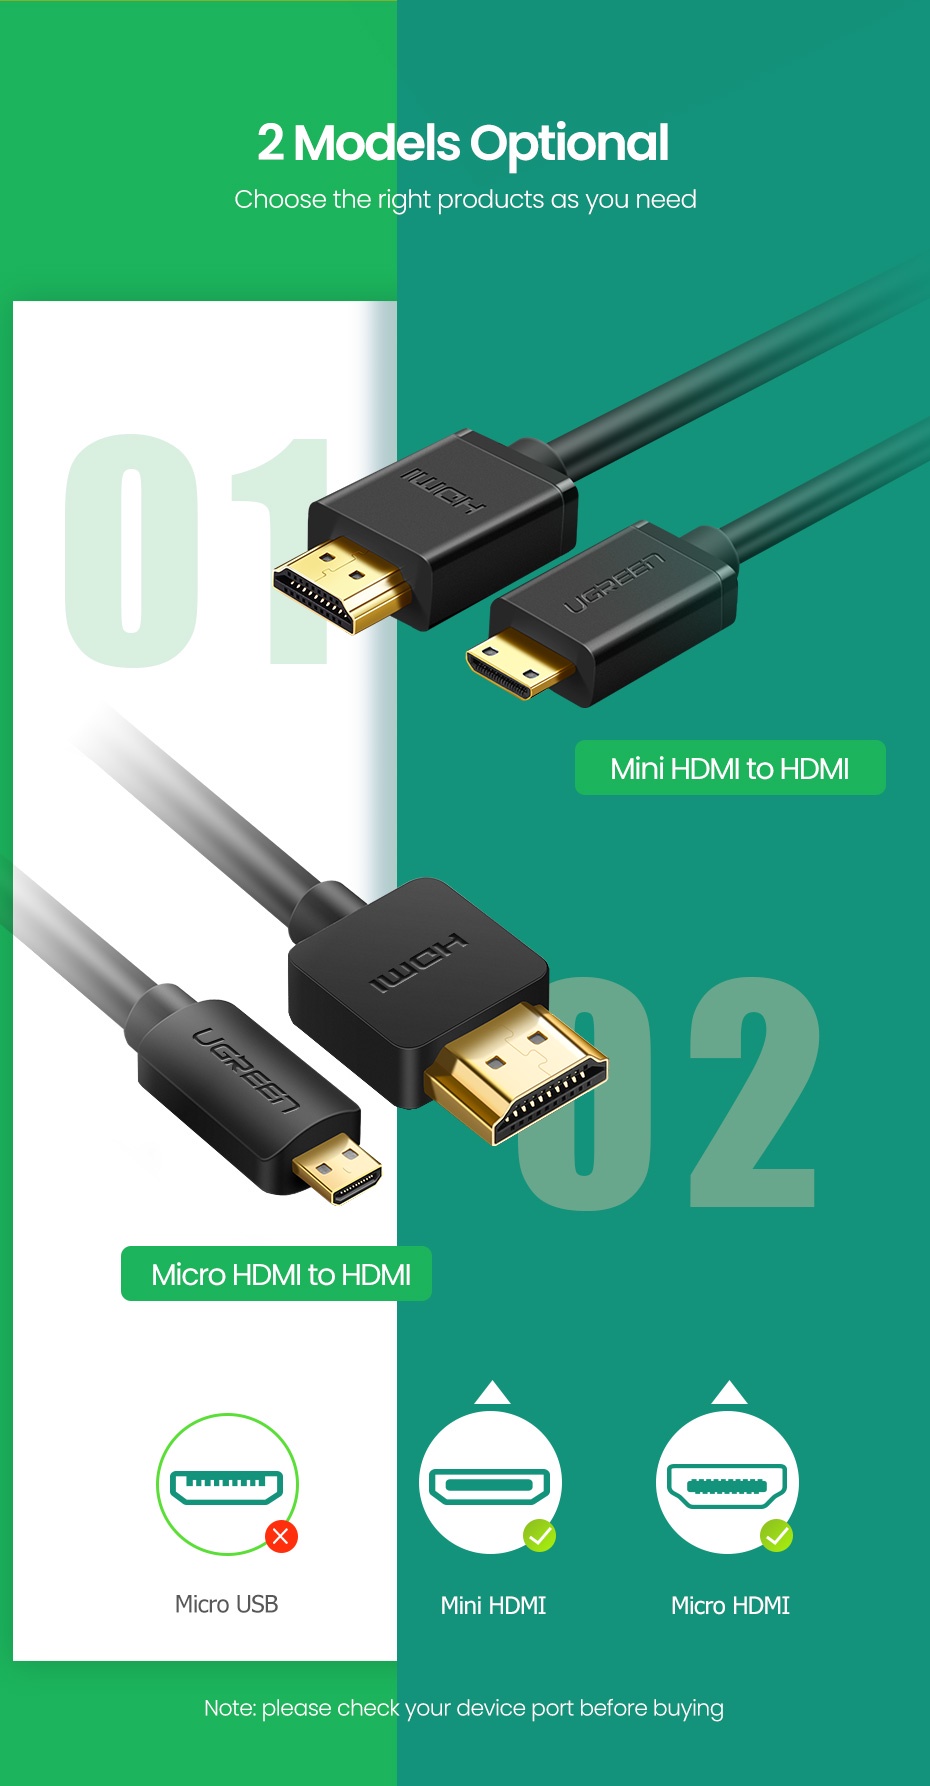 Cat 7 Ethernet Cable - UGREEN Micro HDMI to HDMI 4K Cable 3D Adapter 1M - High Quality Video and Audio Transfer - SHOPEE MALL | Sri Lanka